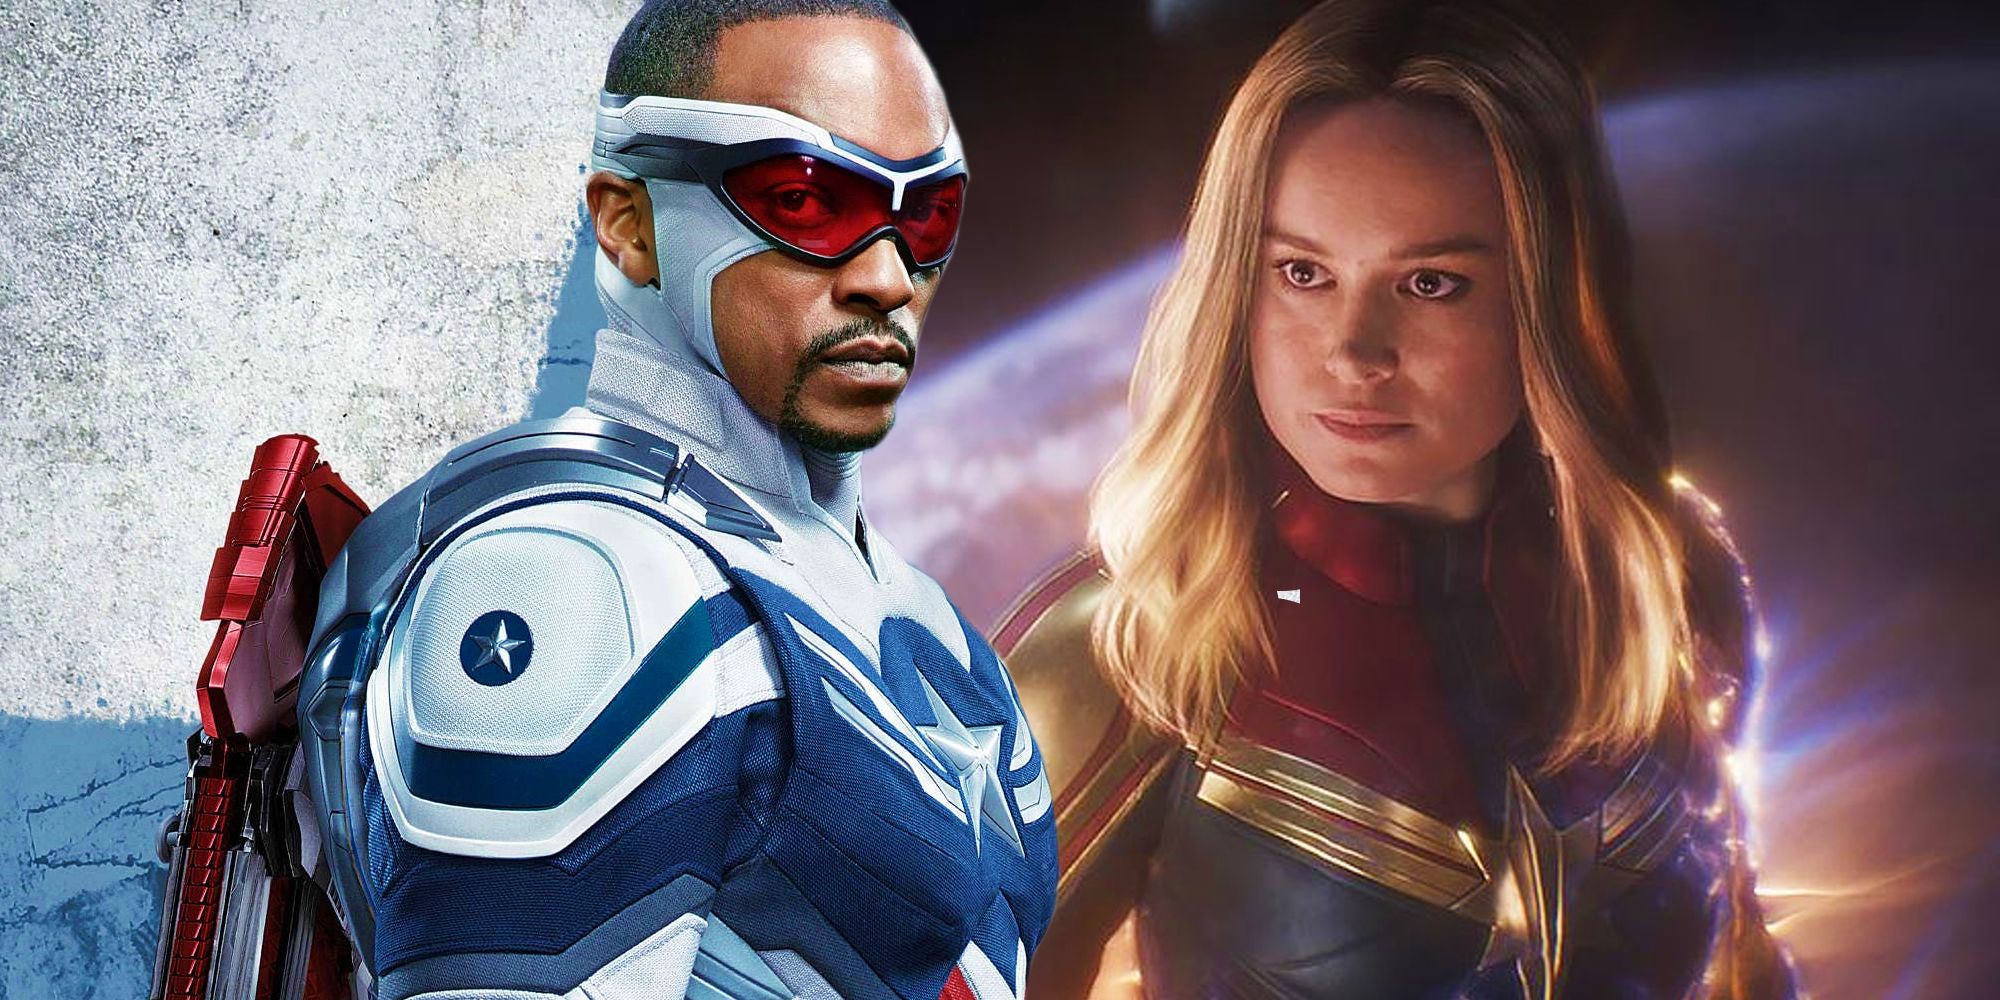 Captain America in his character poster and Captain Marvel from Avengers: Endgame